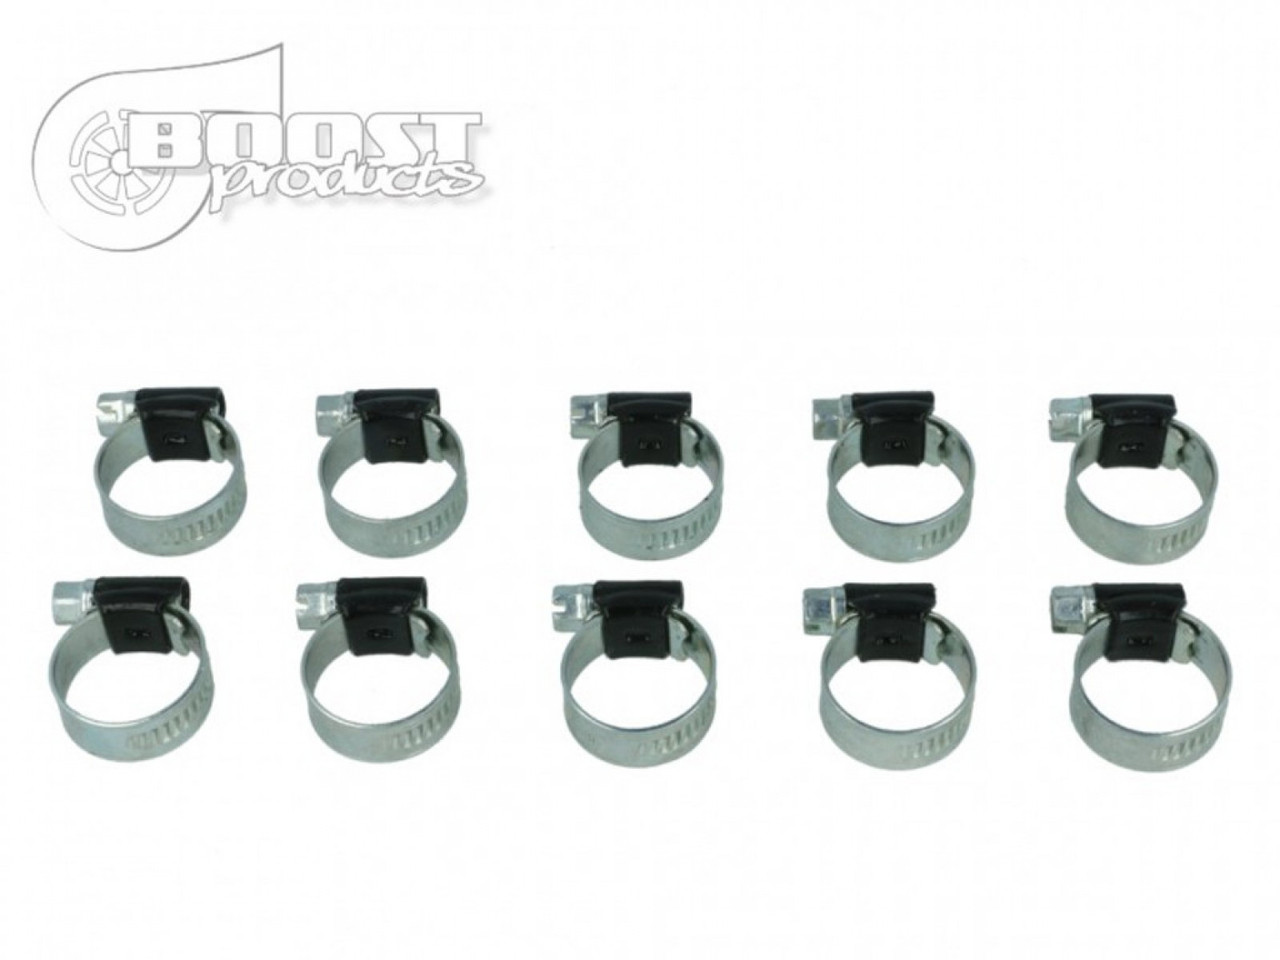 BOOST Products 10 Pack HD Clamps, Black, 11-17mm (7/16 - 43/64") Range (BOP-SC-SW-1117-10)